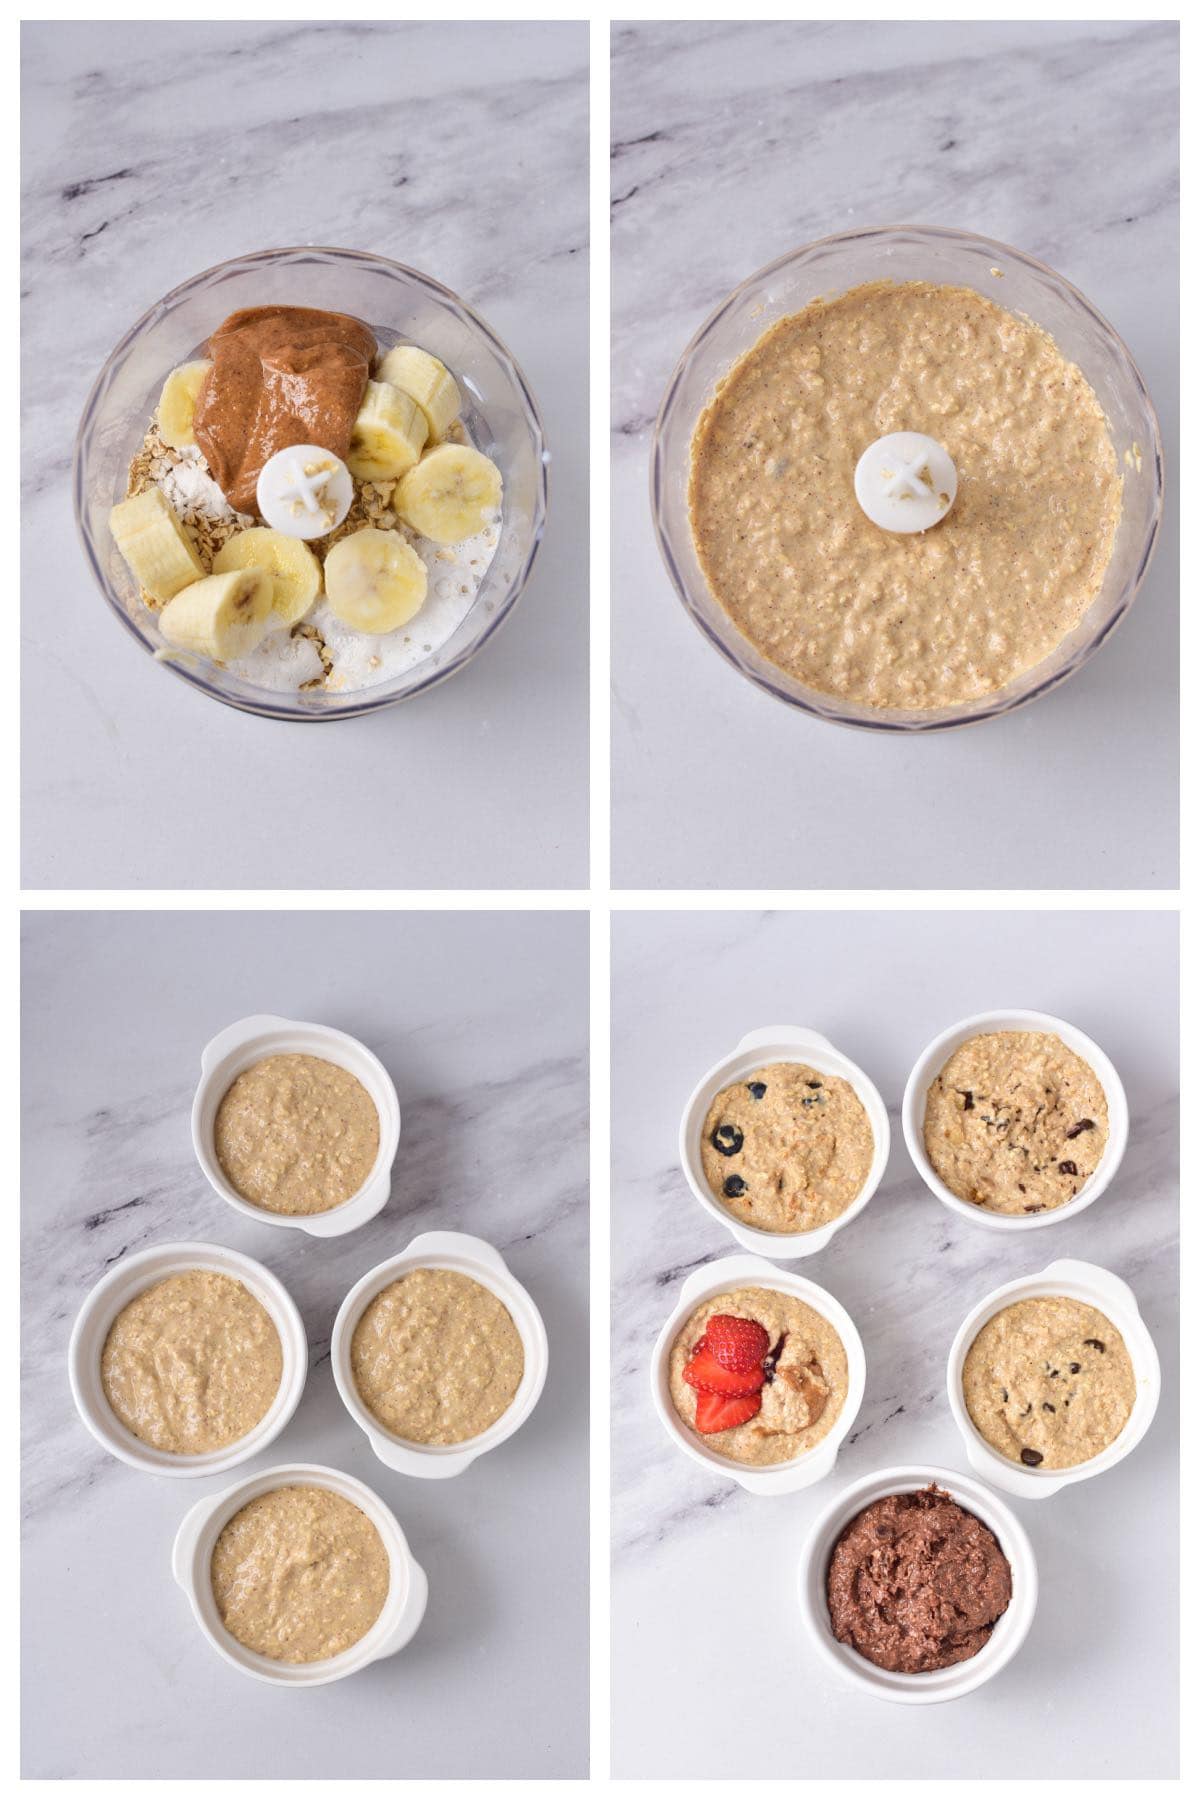 how to make baked oats.